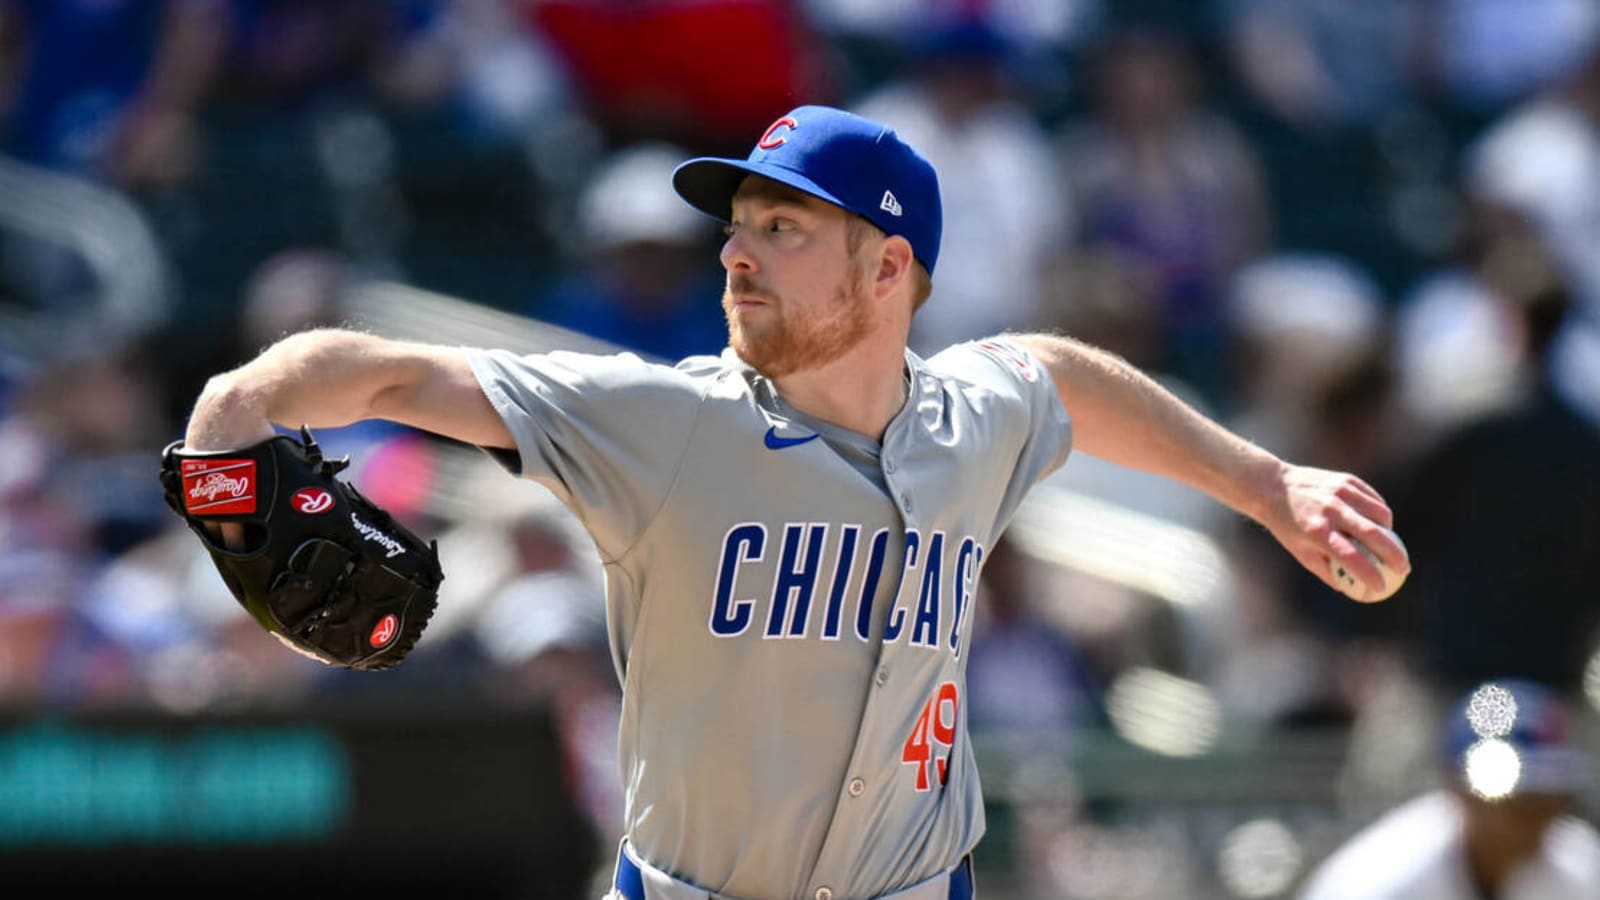 Rays, Cubs trade left-handed pitchers